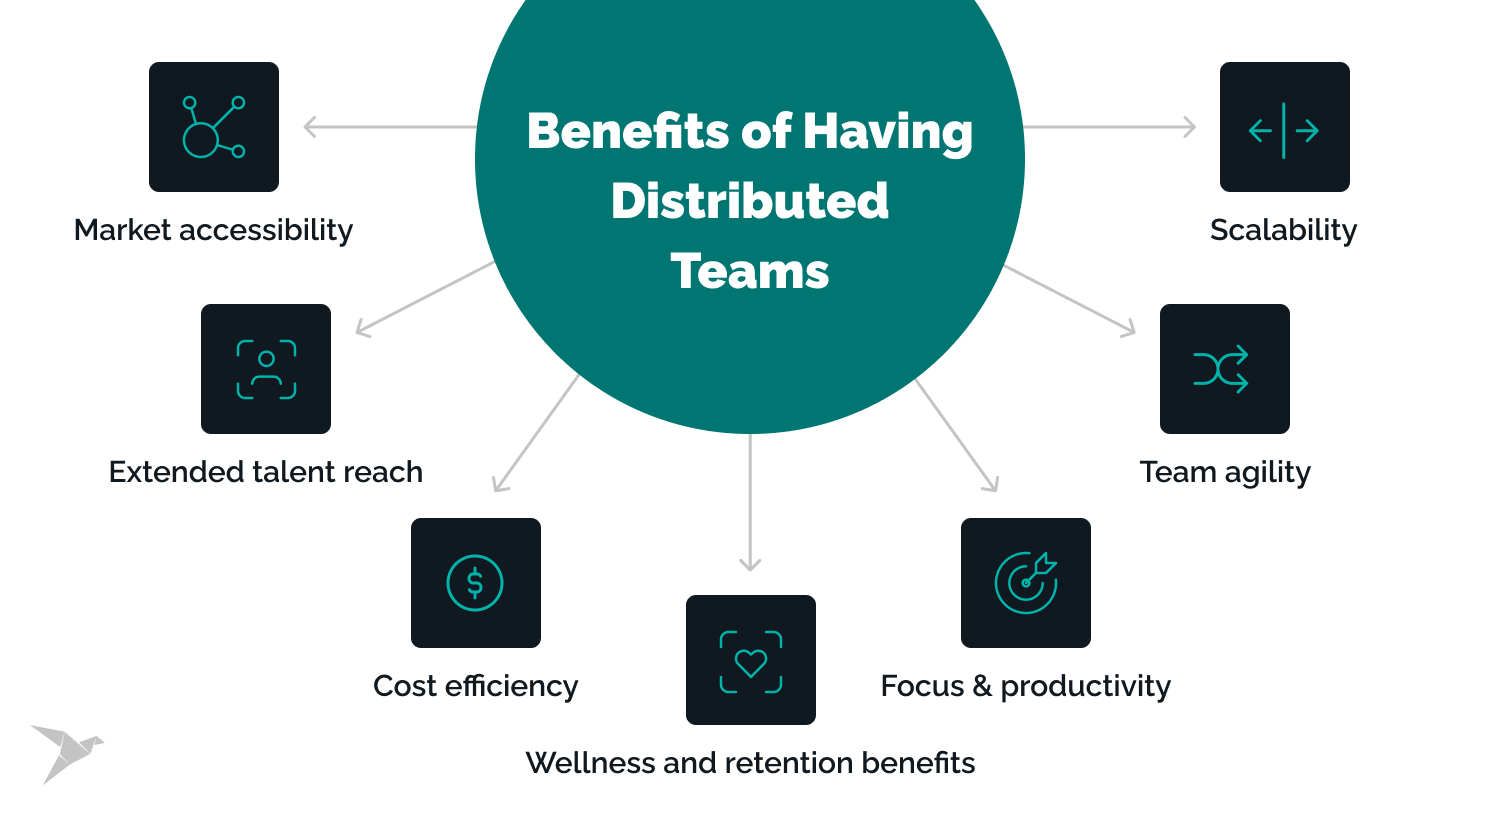 Benefits of Having Distributed Teams